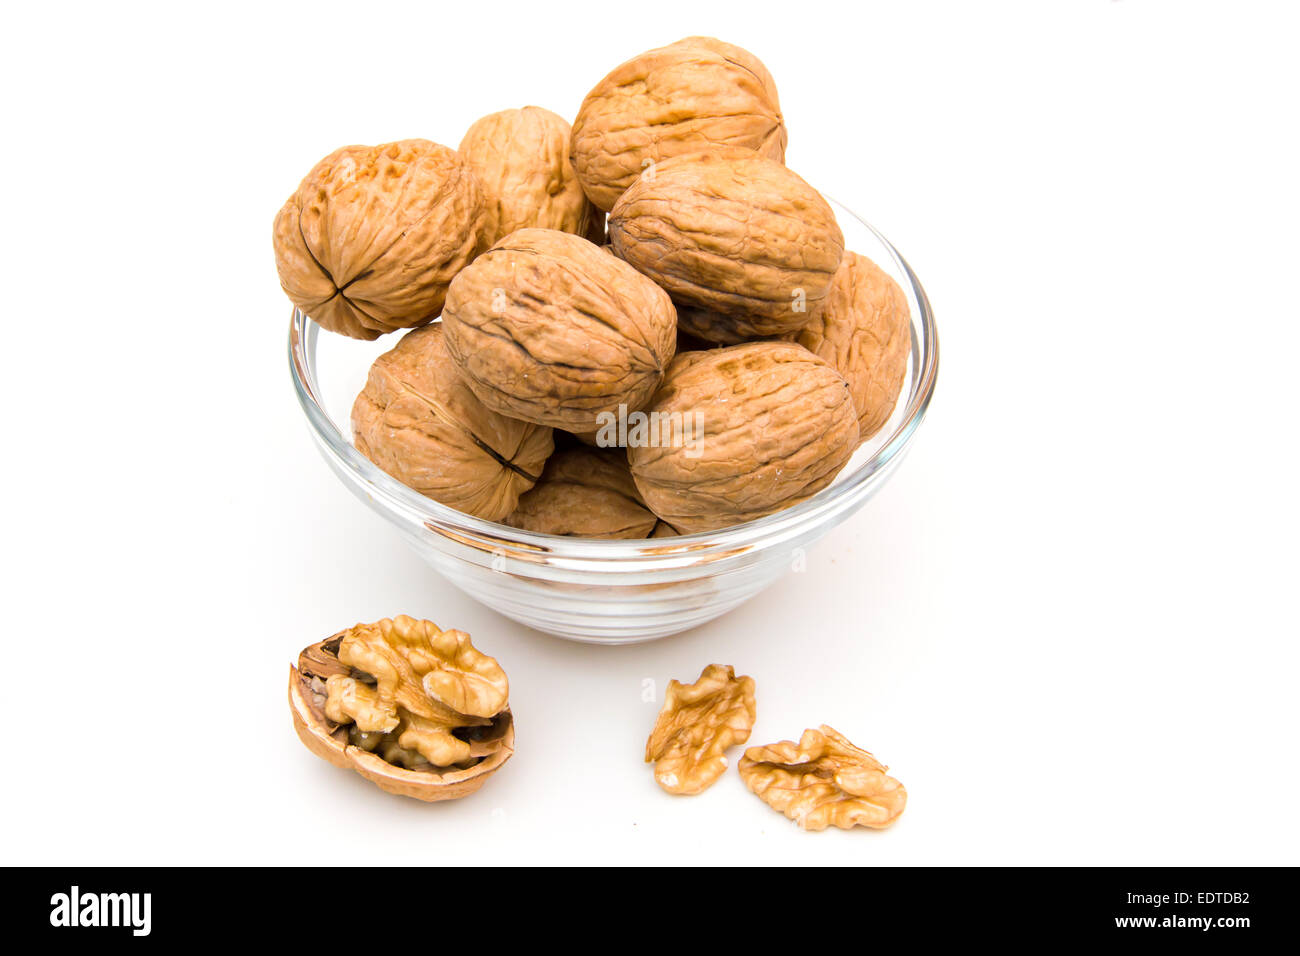 Bowl with unshelled walnuts on white background Stock Photo